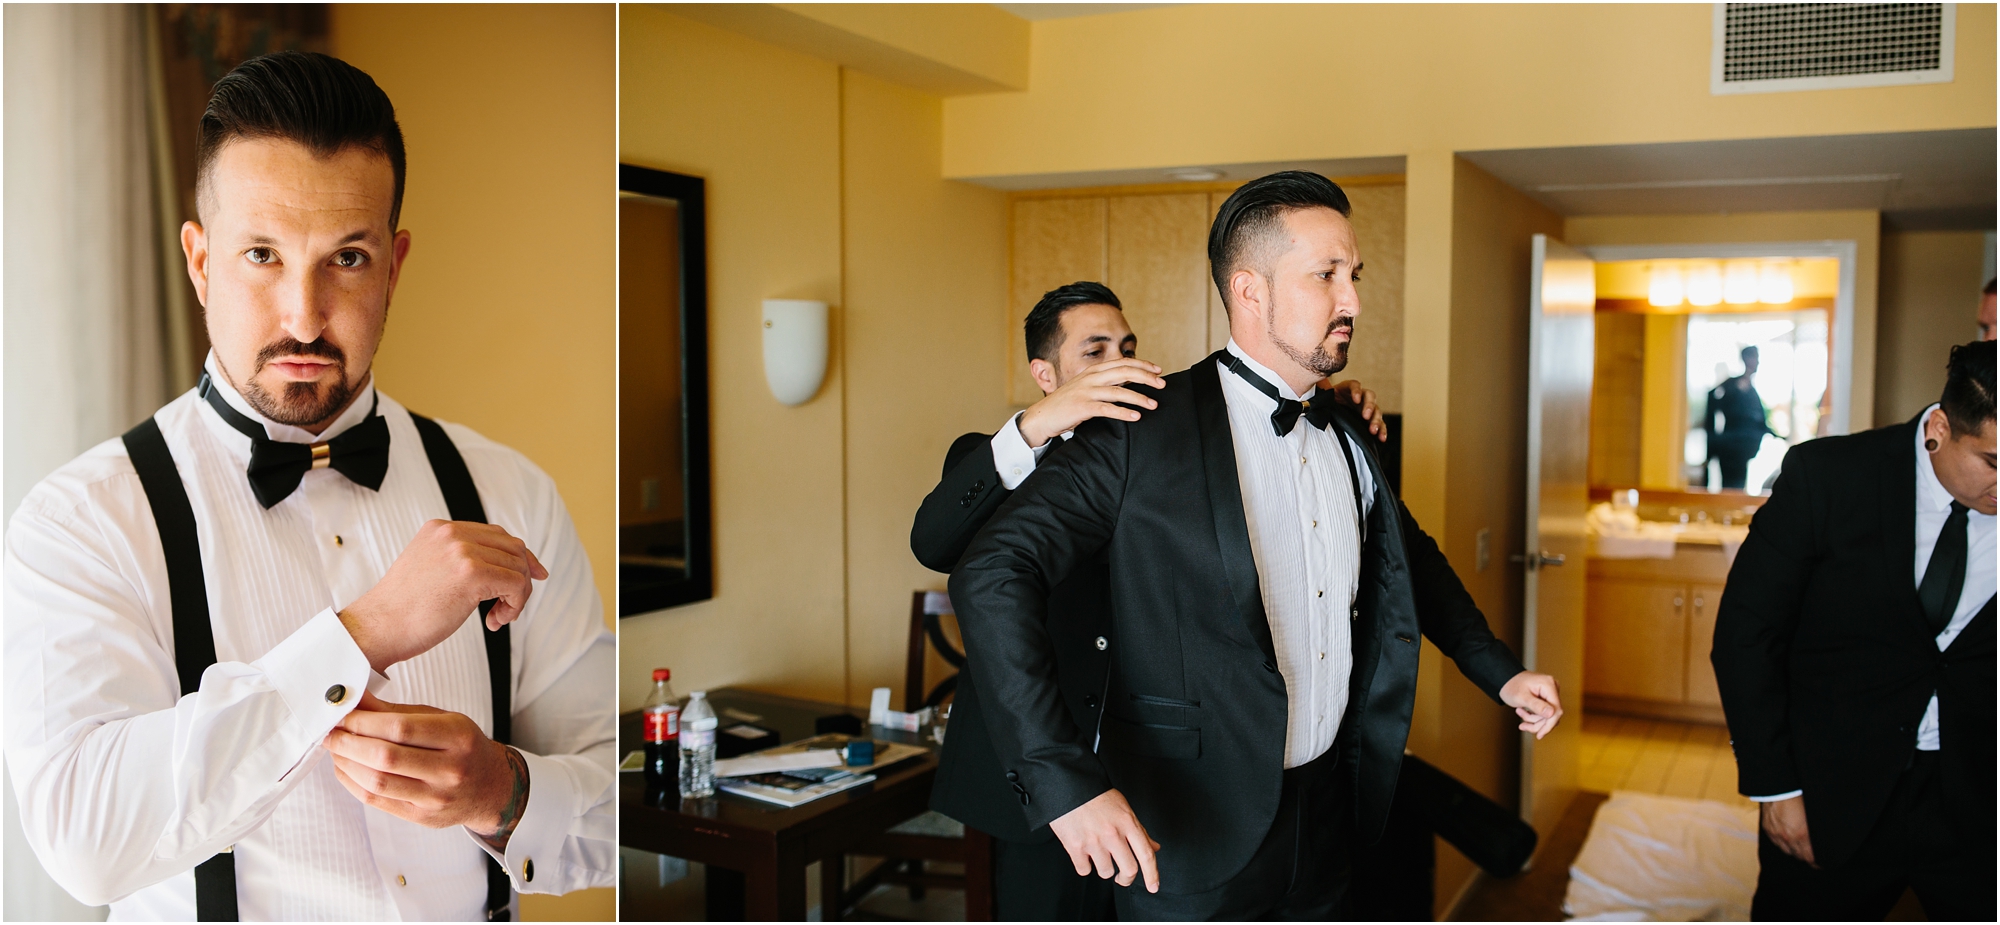 Groom Getting Ready - https://brittneyhannonphotography.com